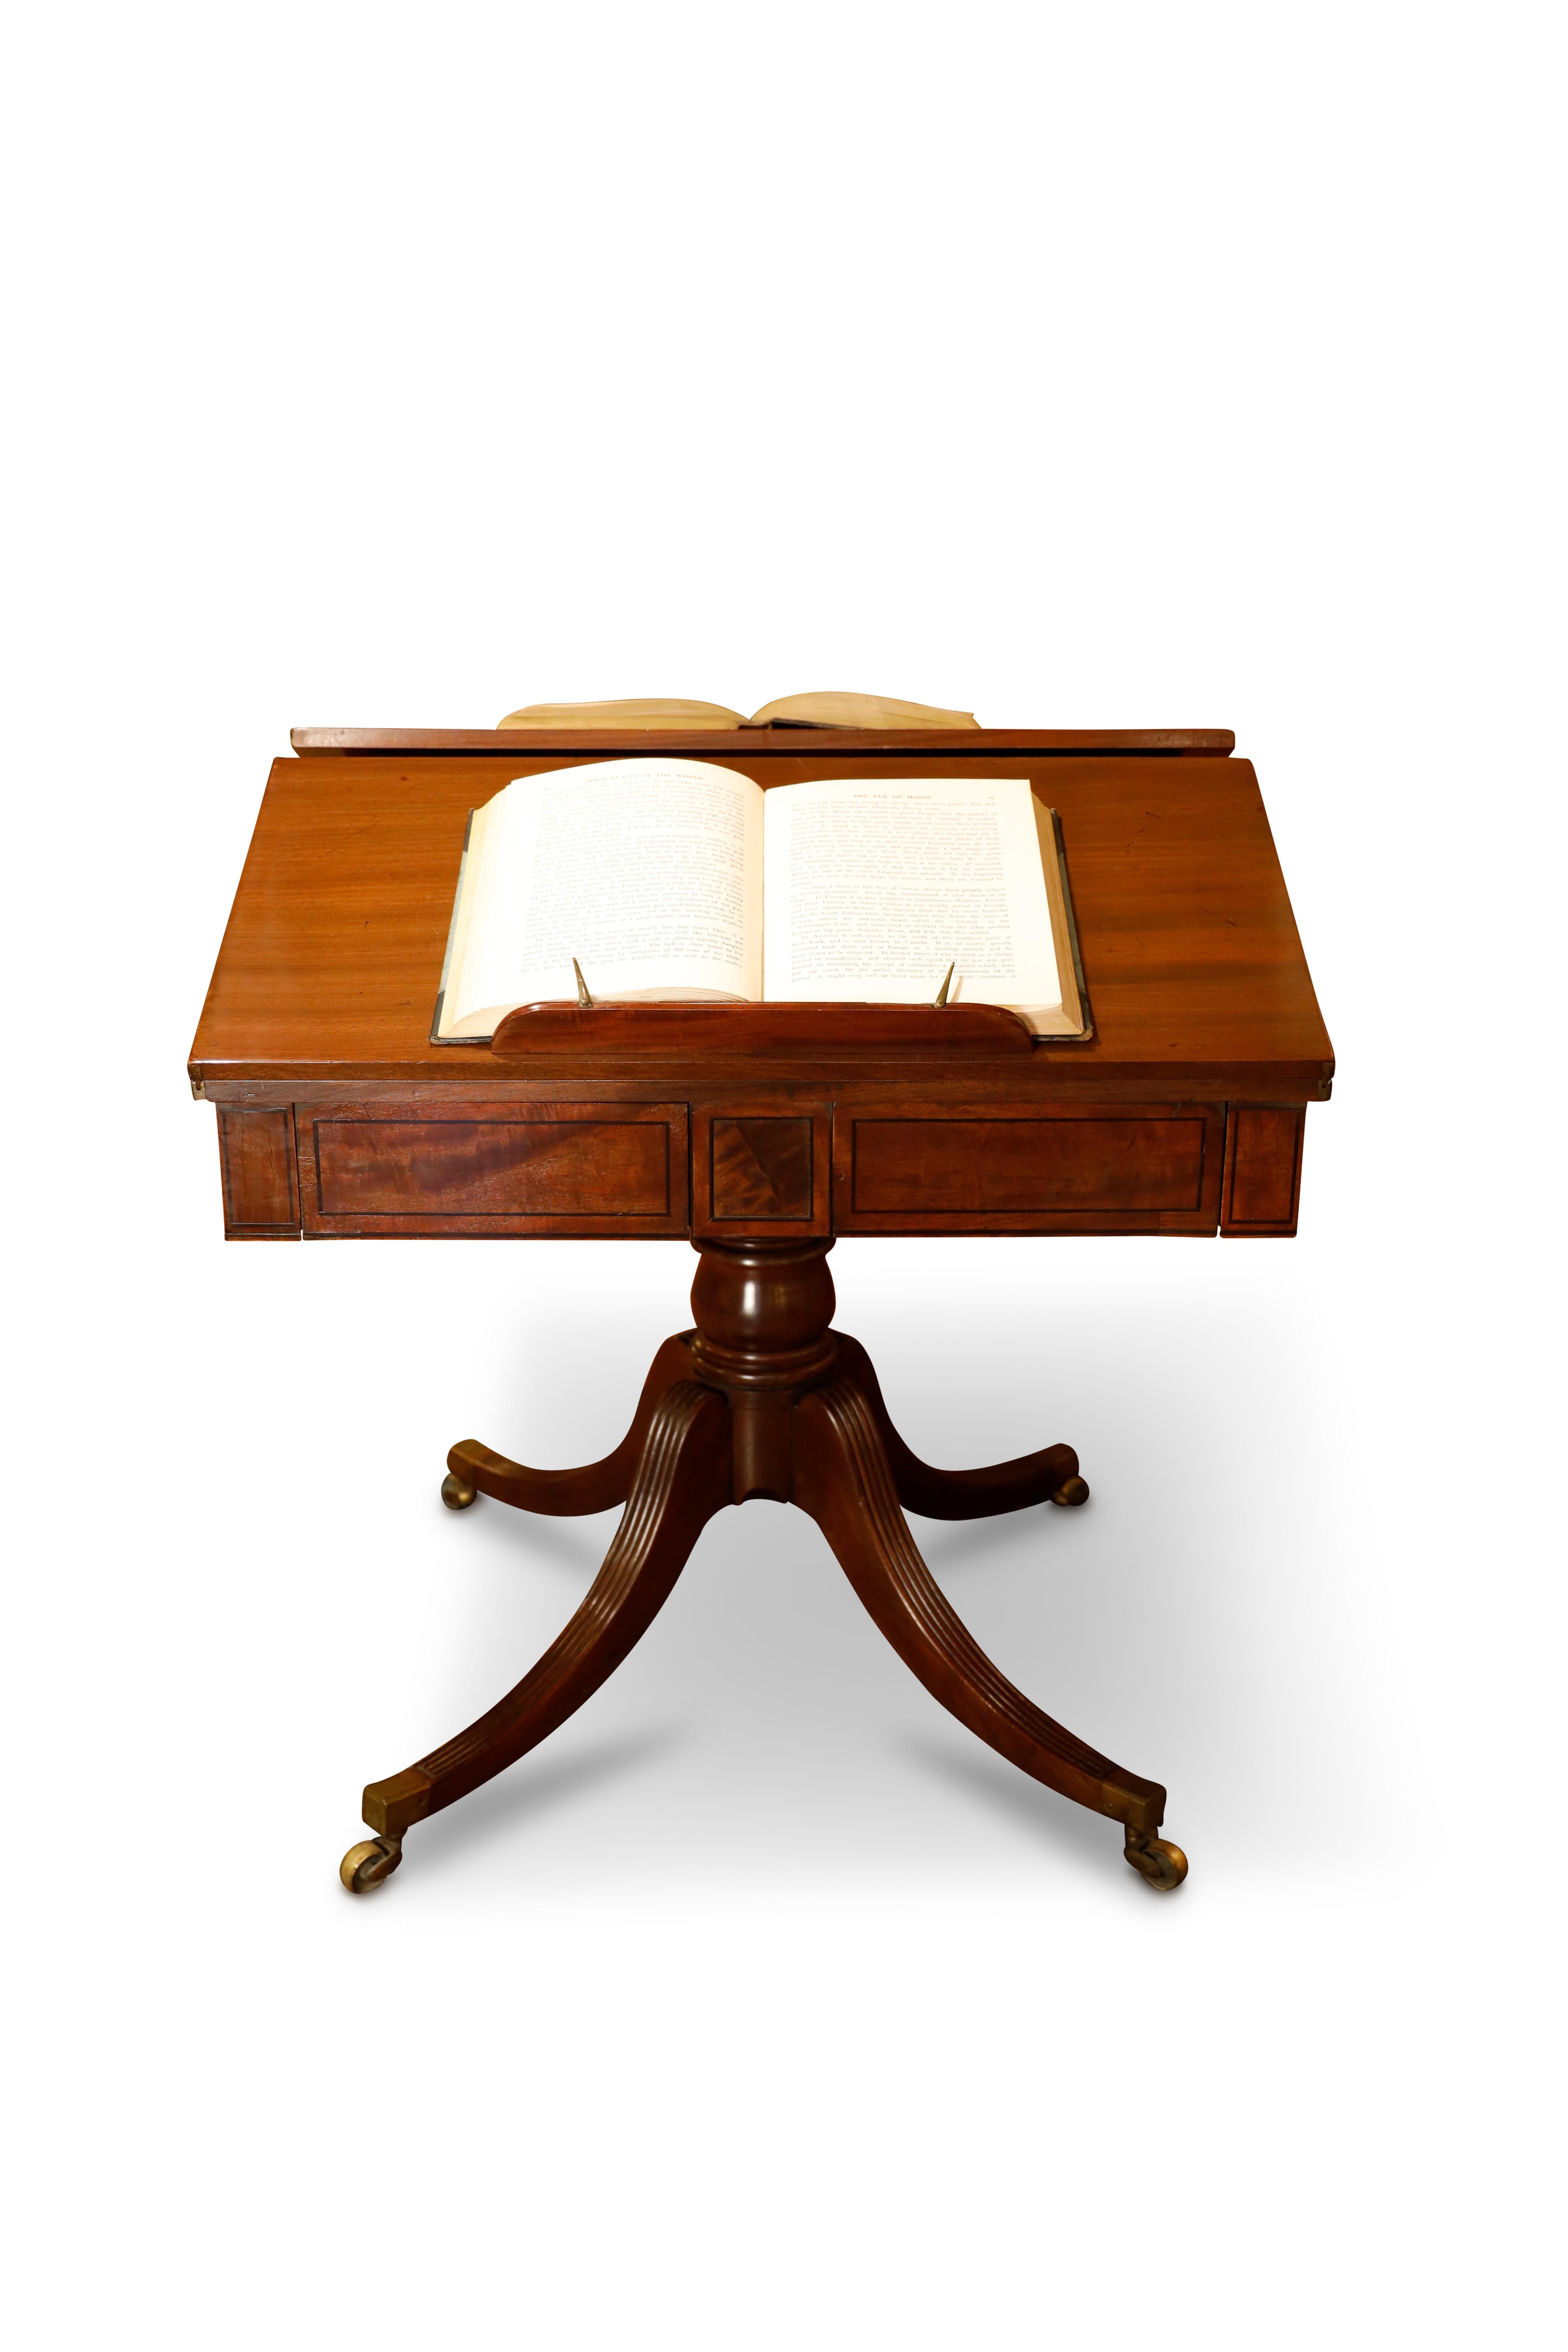 Regency mahogany library table features twin hinged, solid mahogany leaves that can either extend the top as writing surfaces or be used as book supports for reading.  Underneath the top there are opposing frieze drawers and false drawers.  The